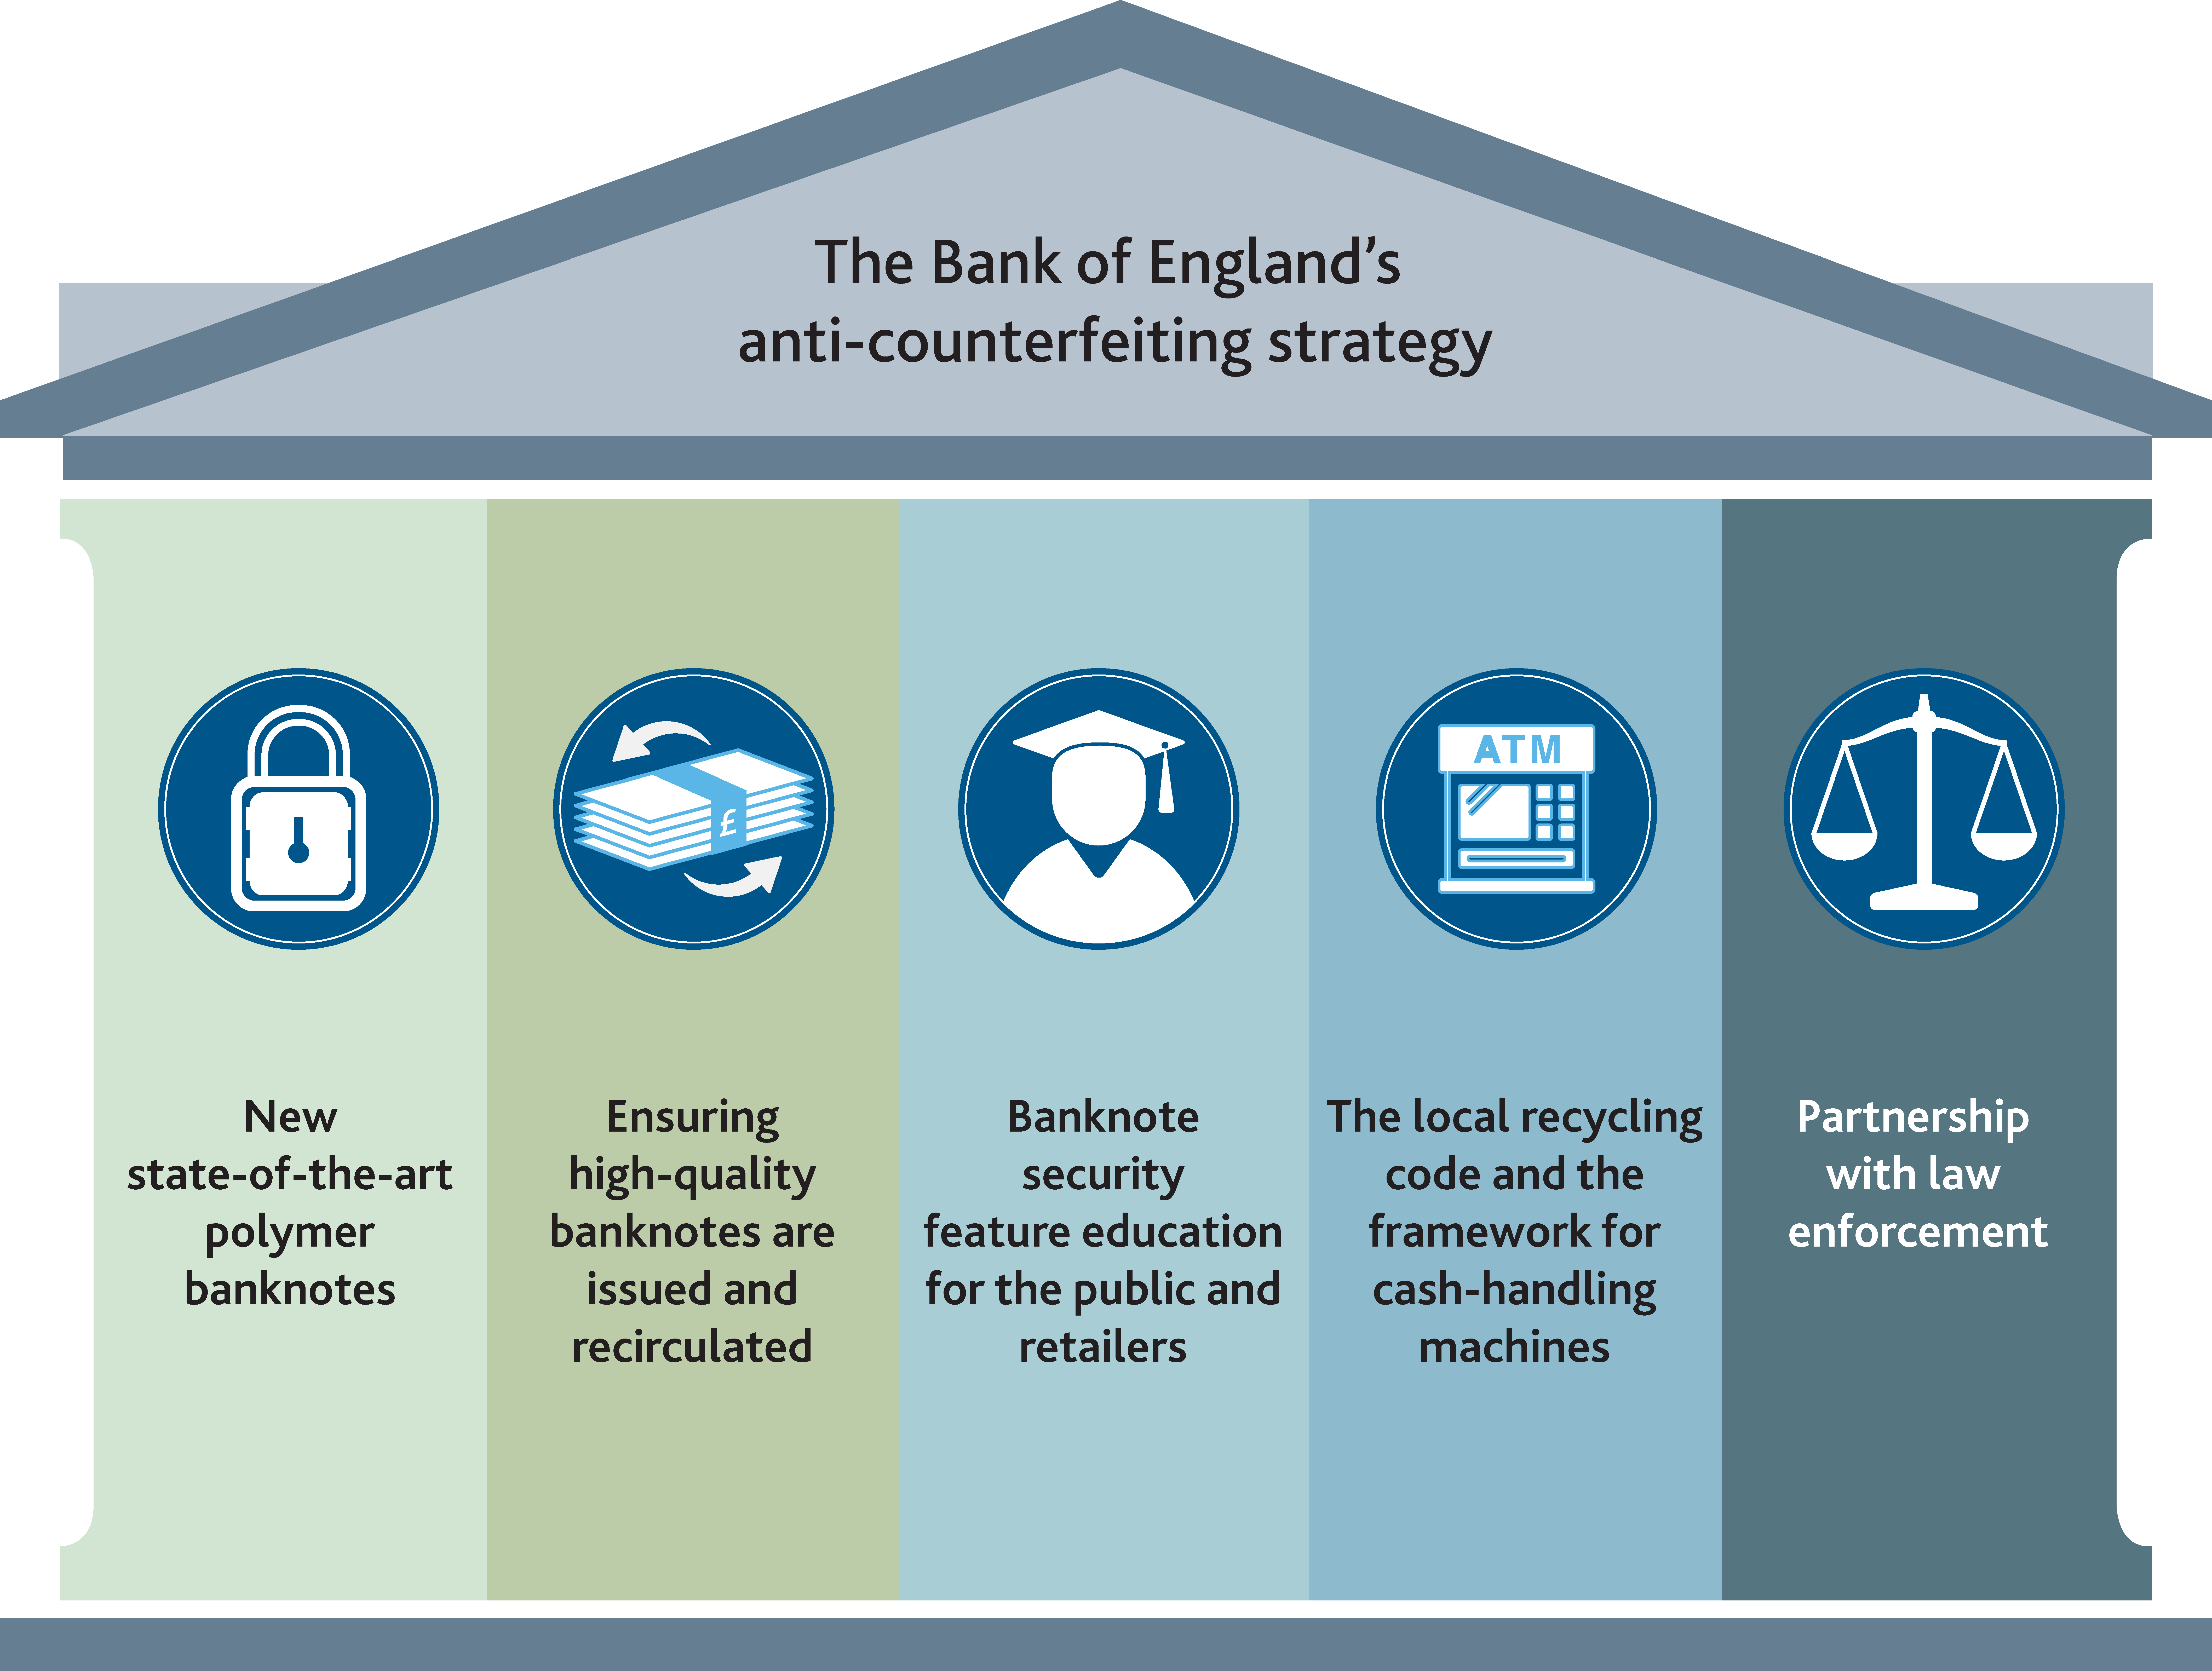 The Bank of England's anti-counterfeiting strategy